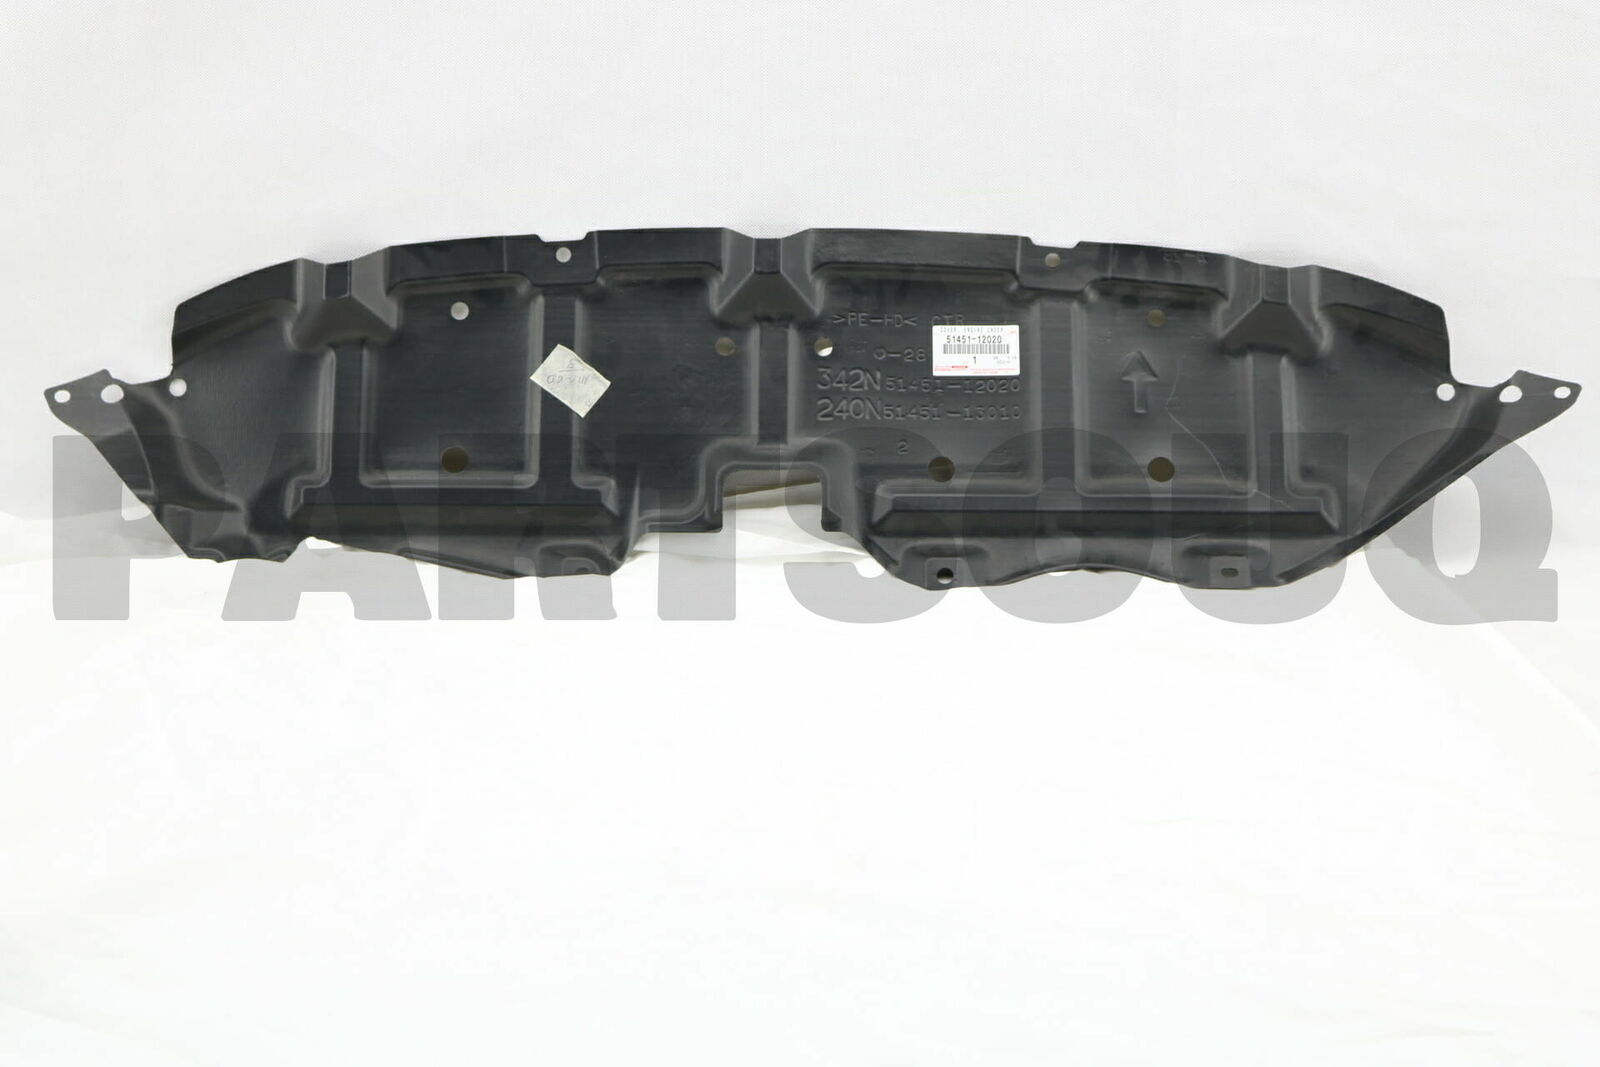 5145112020 Genuine Toyota COVER Super sale period limited UNDER Translated 51451-12020 ENGINE